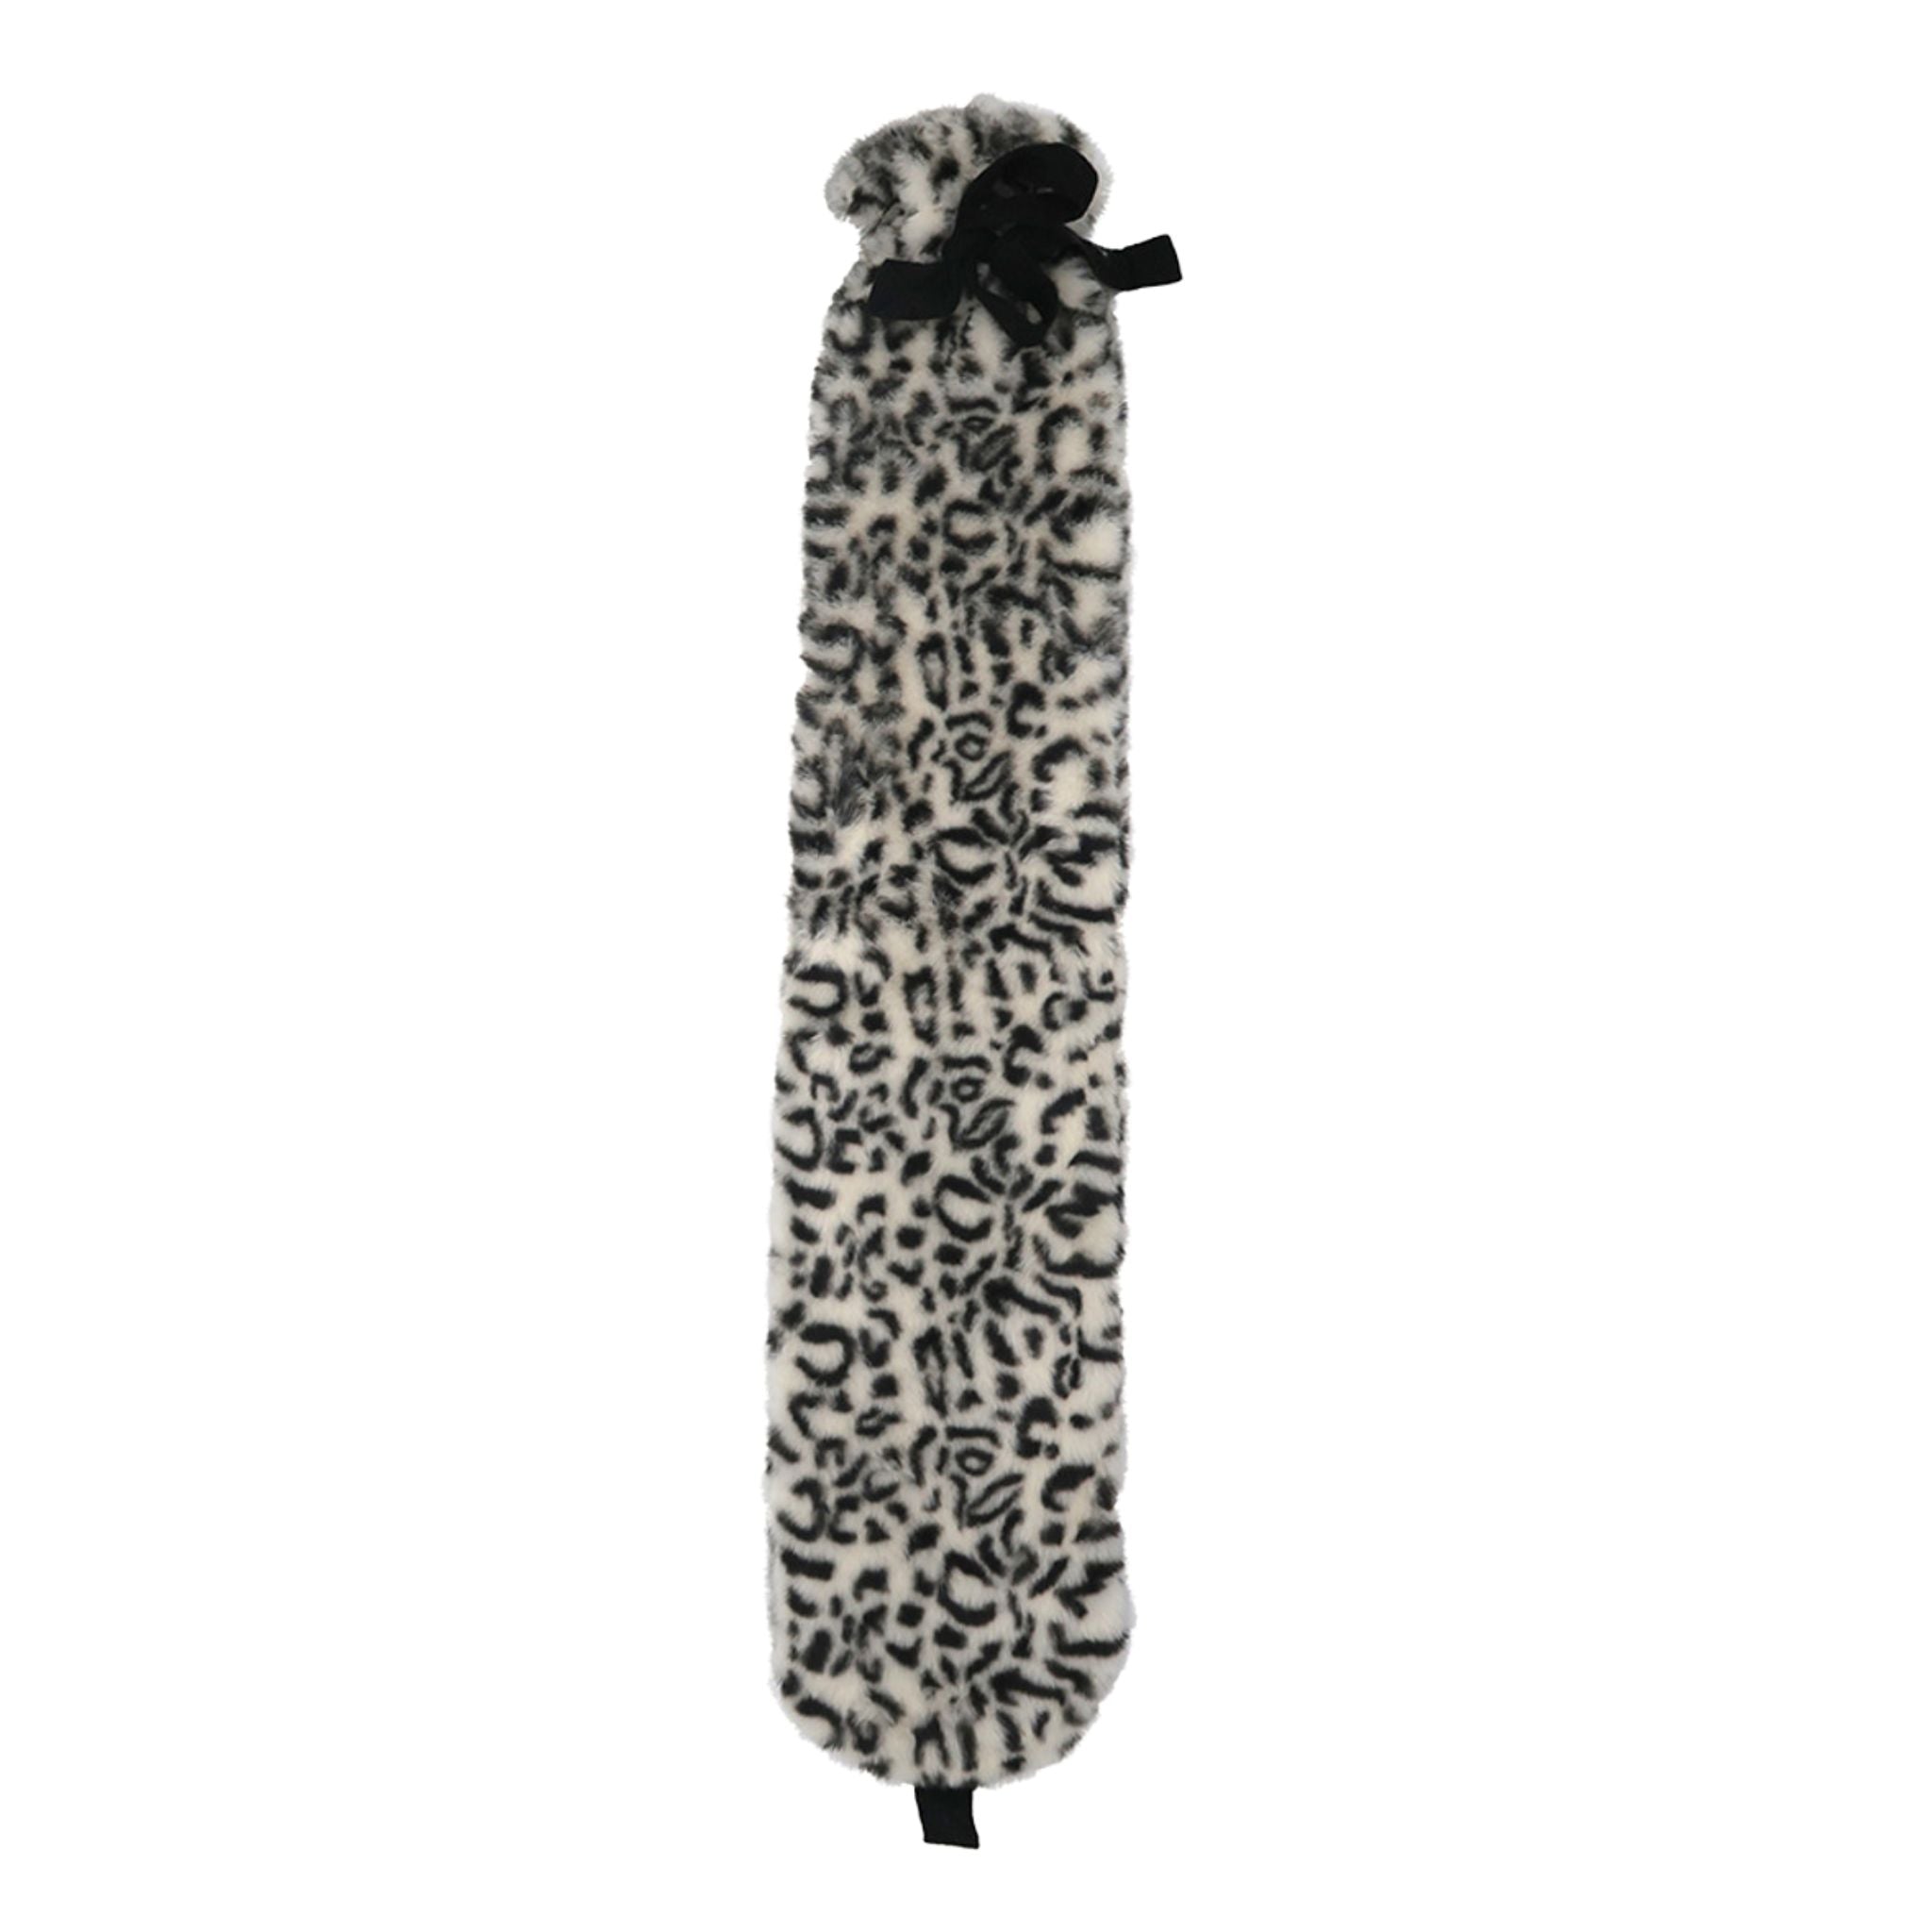 2 Litre Long Hot Water Bottle with Snowy Leopard Faux Fur Cover and Ribbon Tie